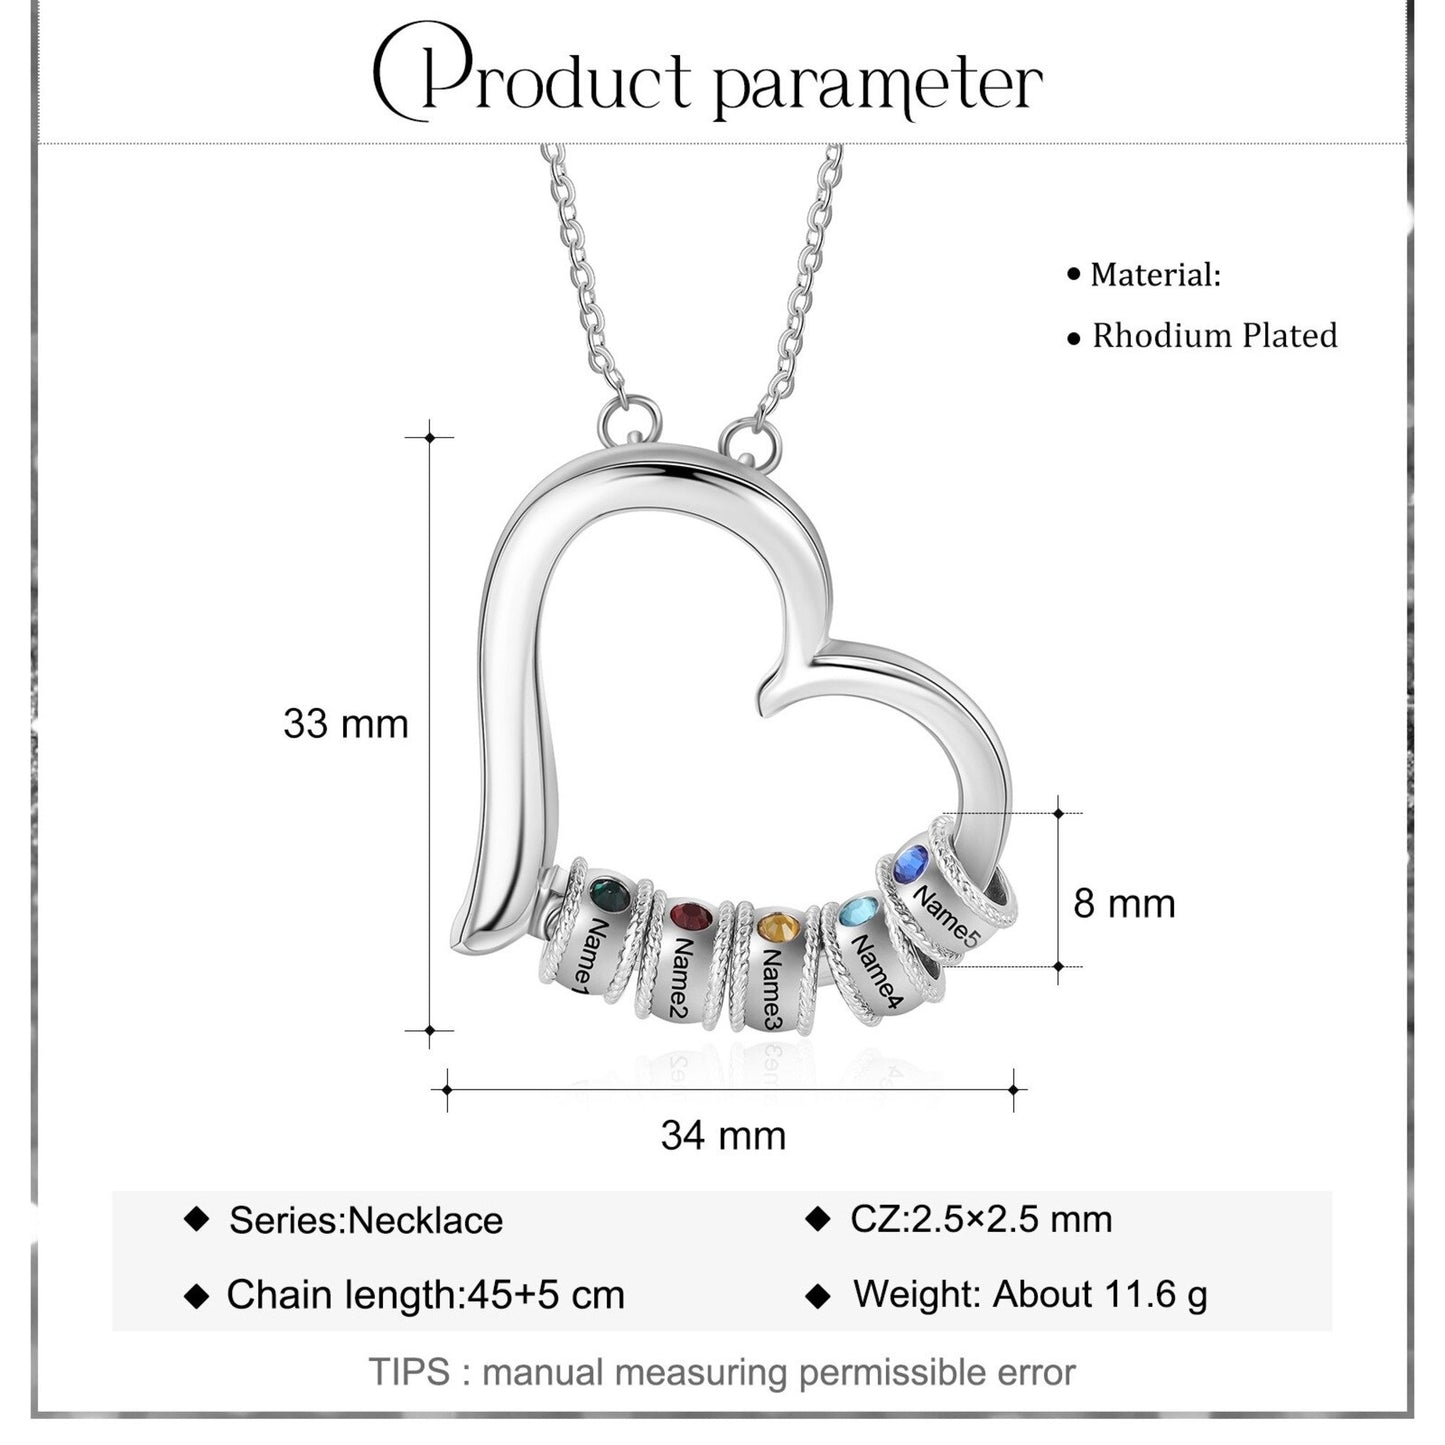 Personalized Family Heart Pendant Necklace